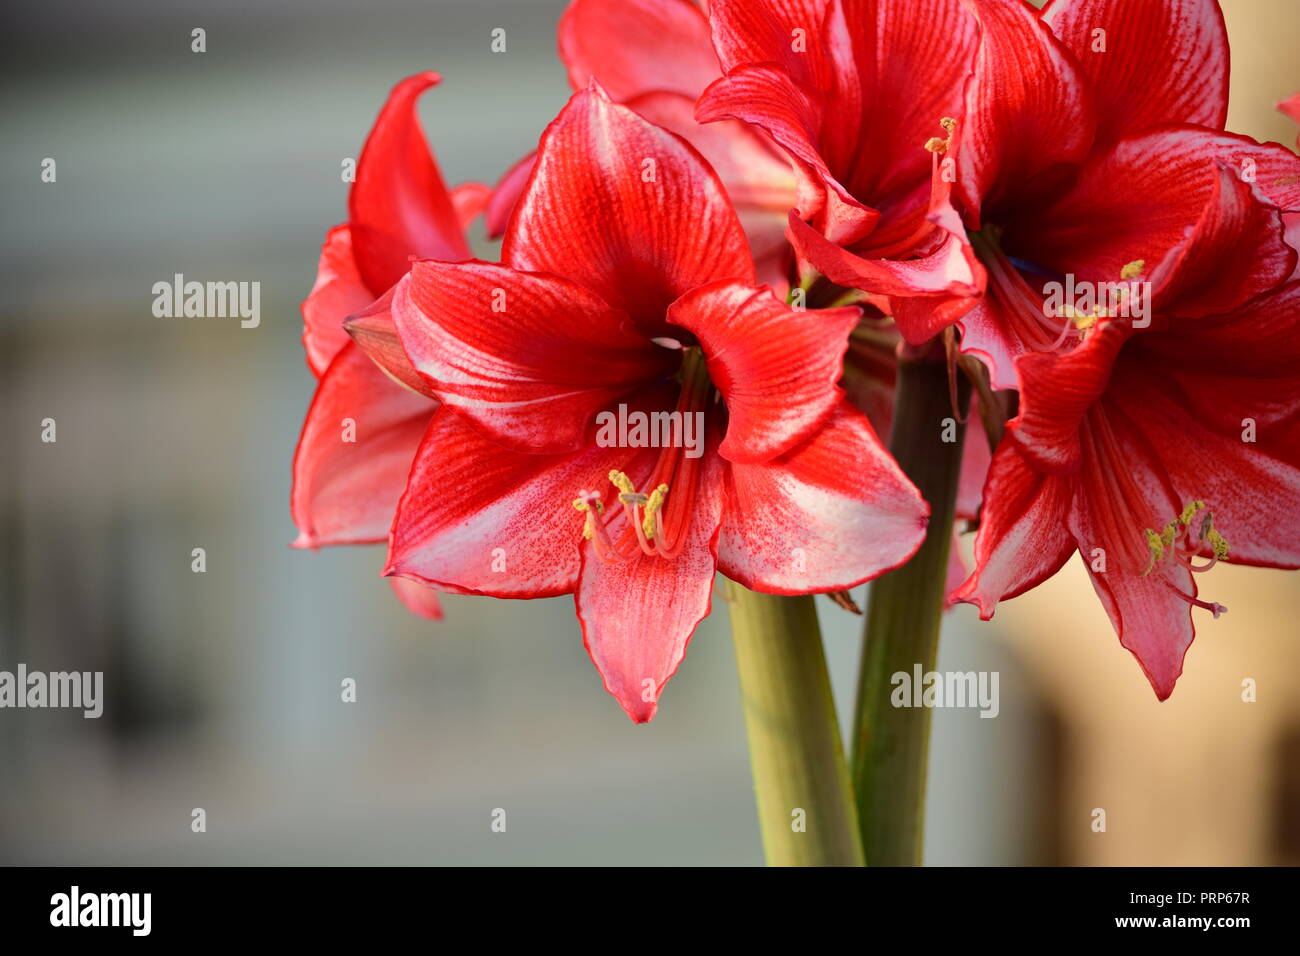 A bunch of Charisma Amaryllis flowers, from two stems coming out of the same bulb. White red petals with pollen stamens. Gardening, roof garden, Malta Stock Photo